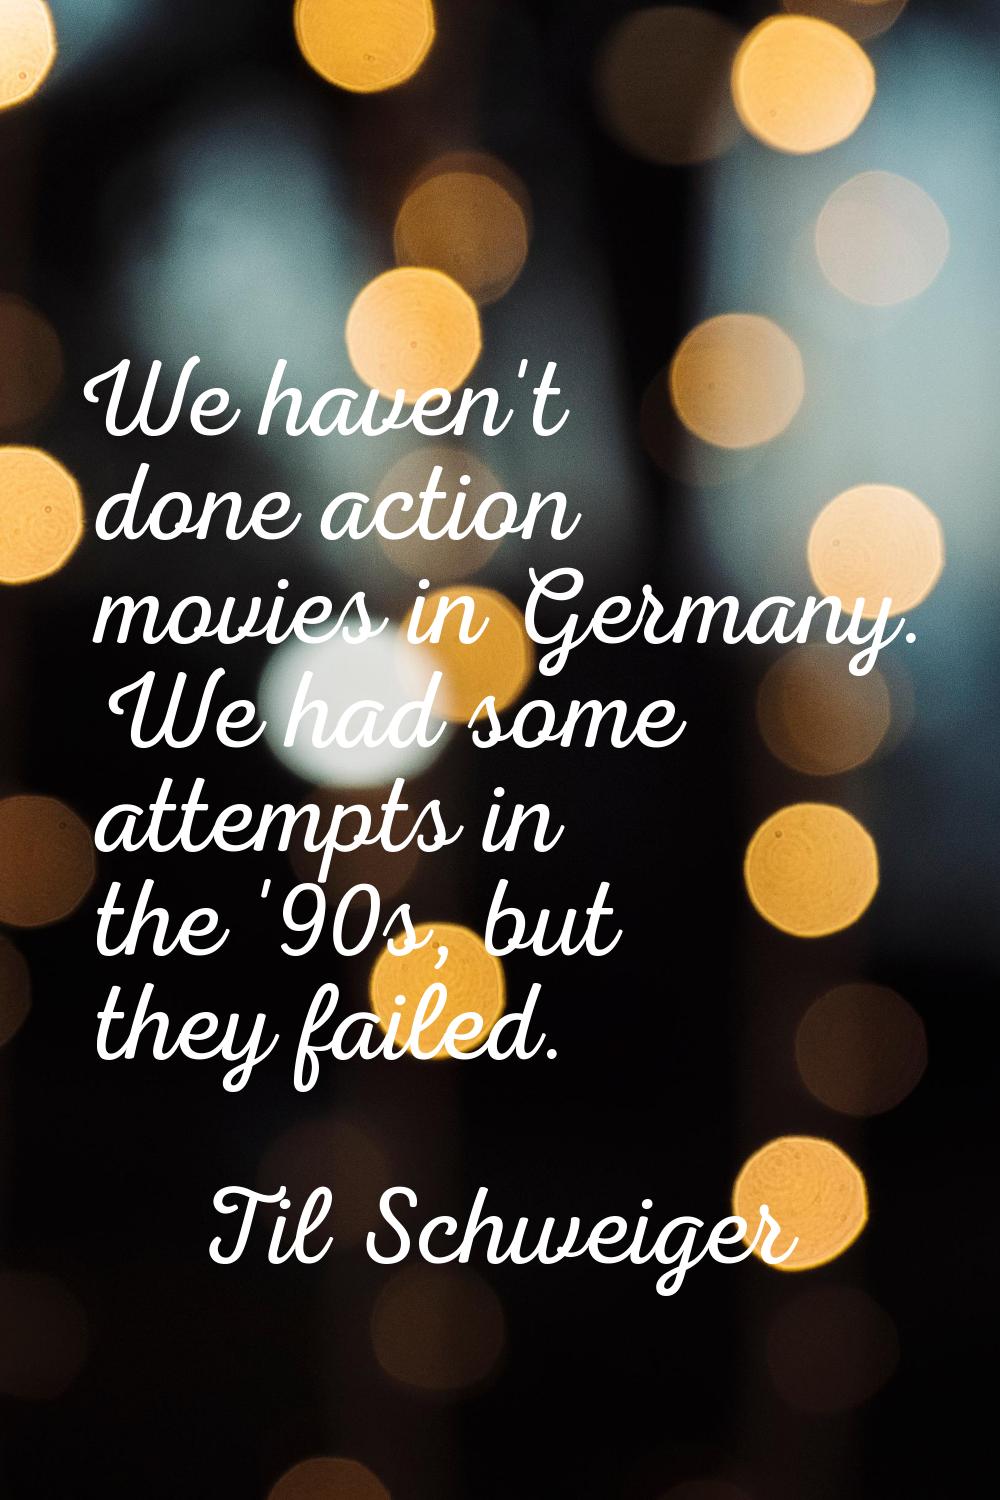 We haven't done action movies in Germany. We had some attempts in the '90s, but they failed.